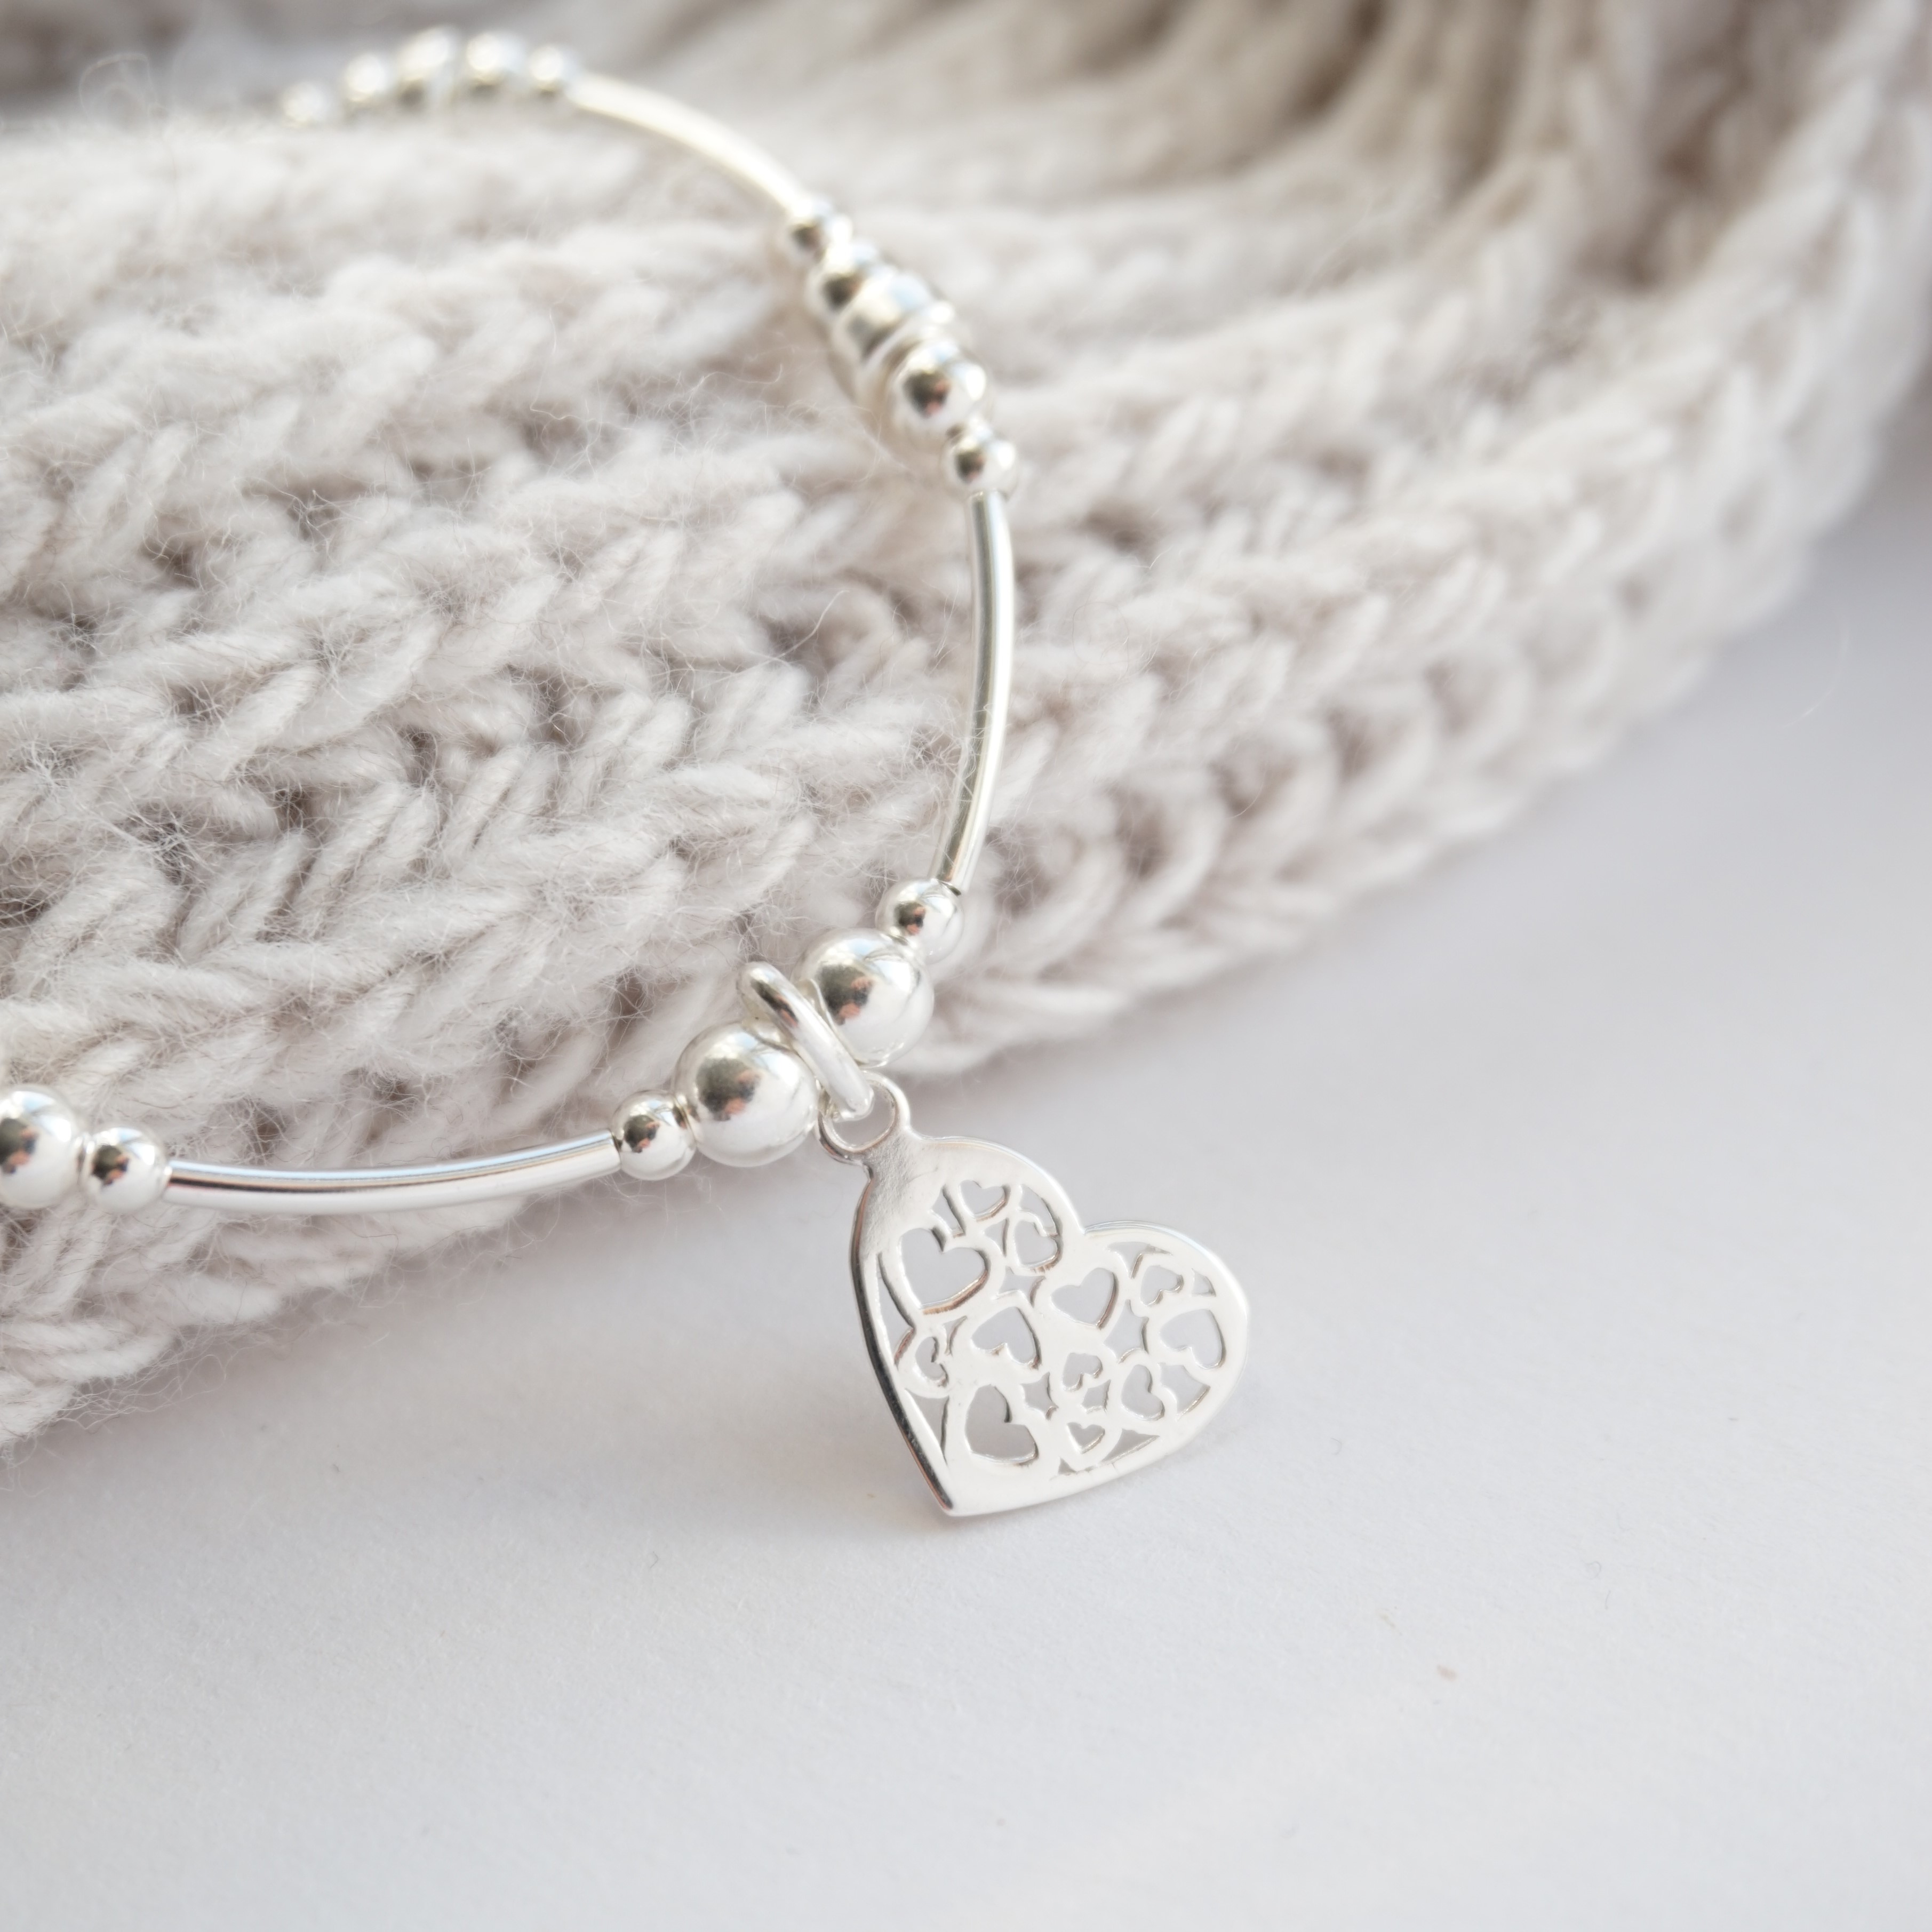 sterling silver noodle bracelet with hearts in heart charm